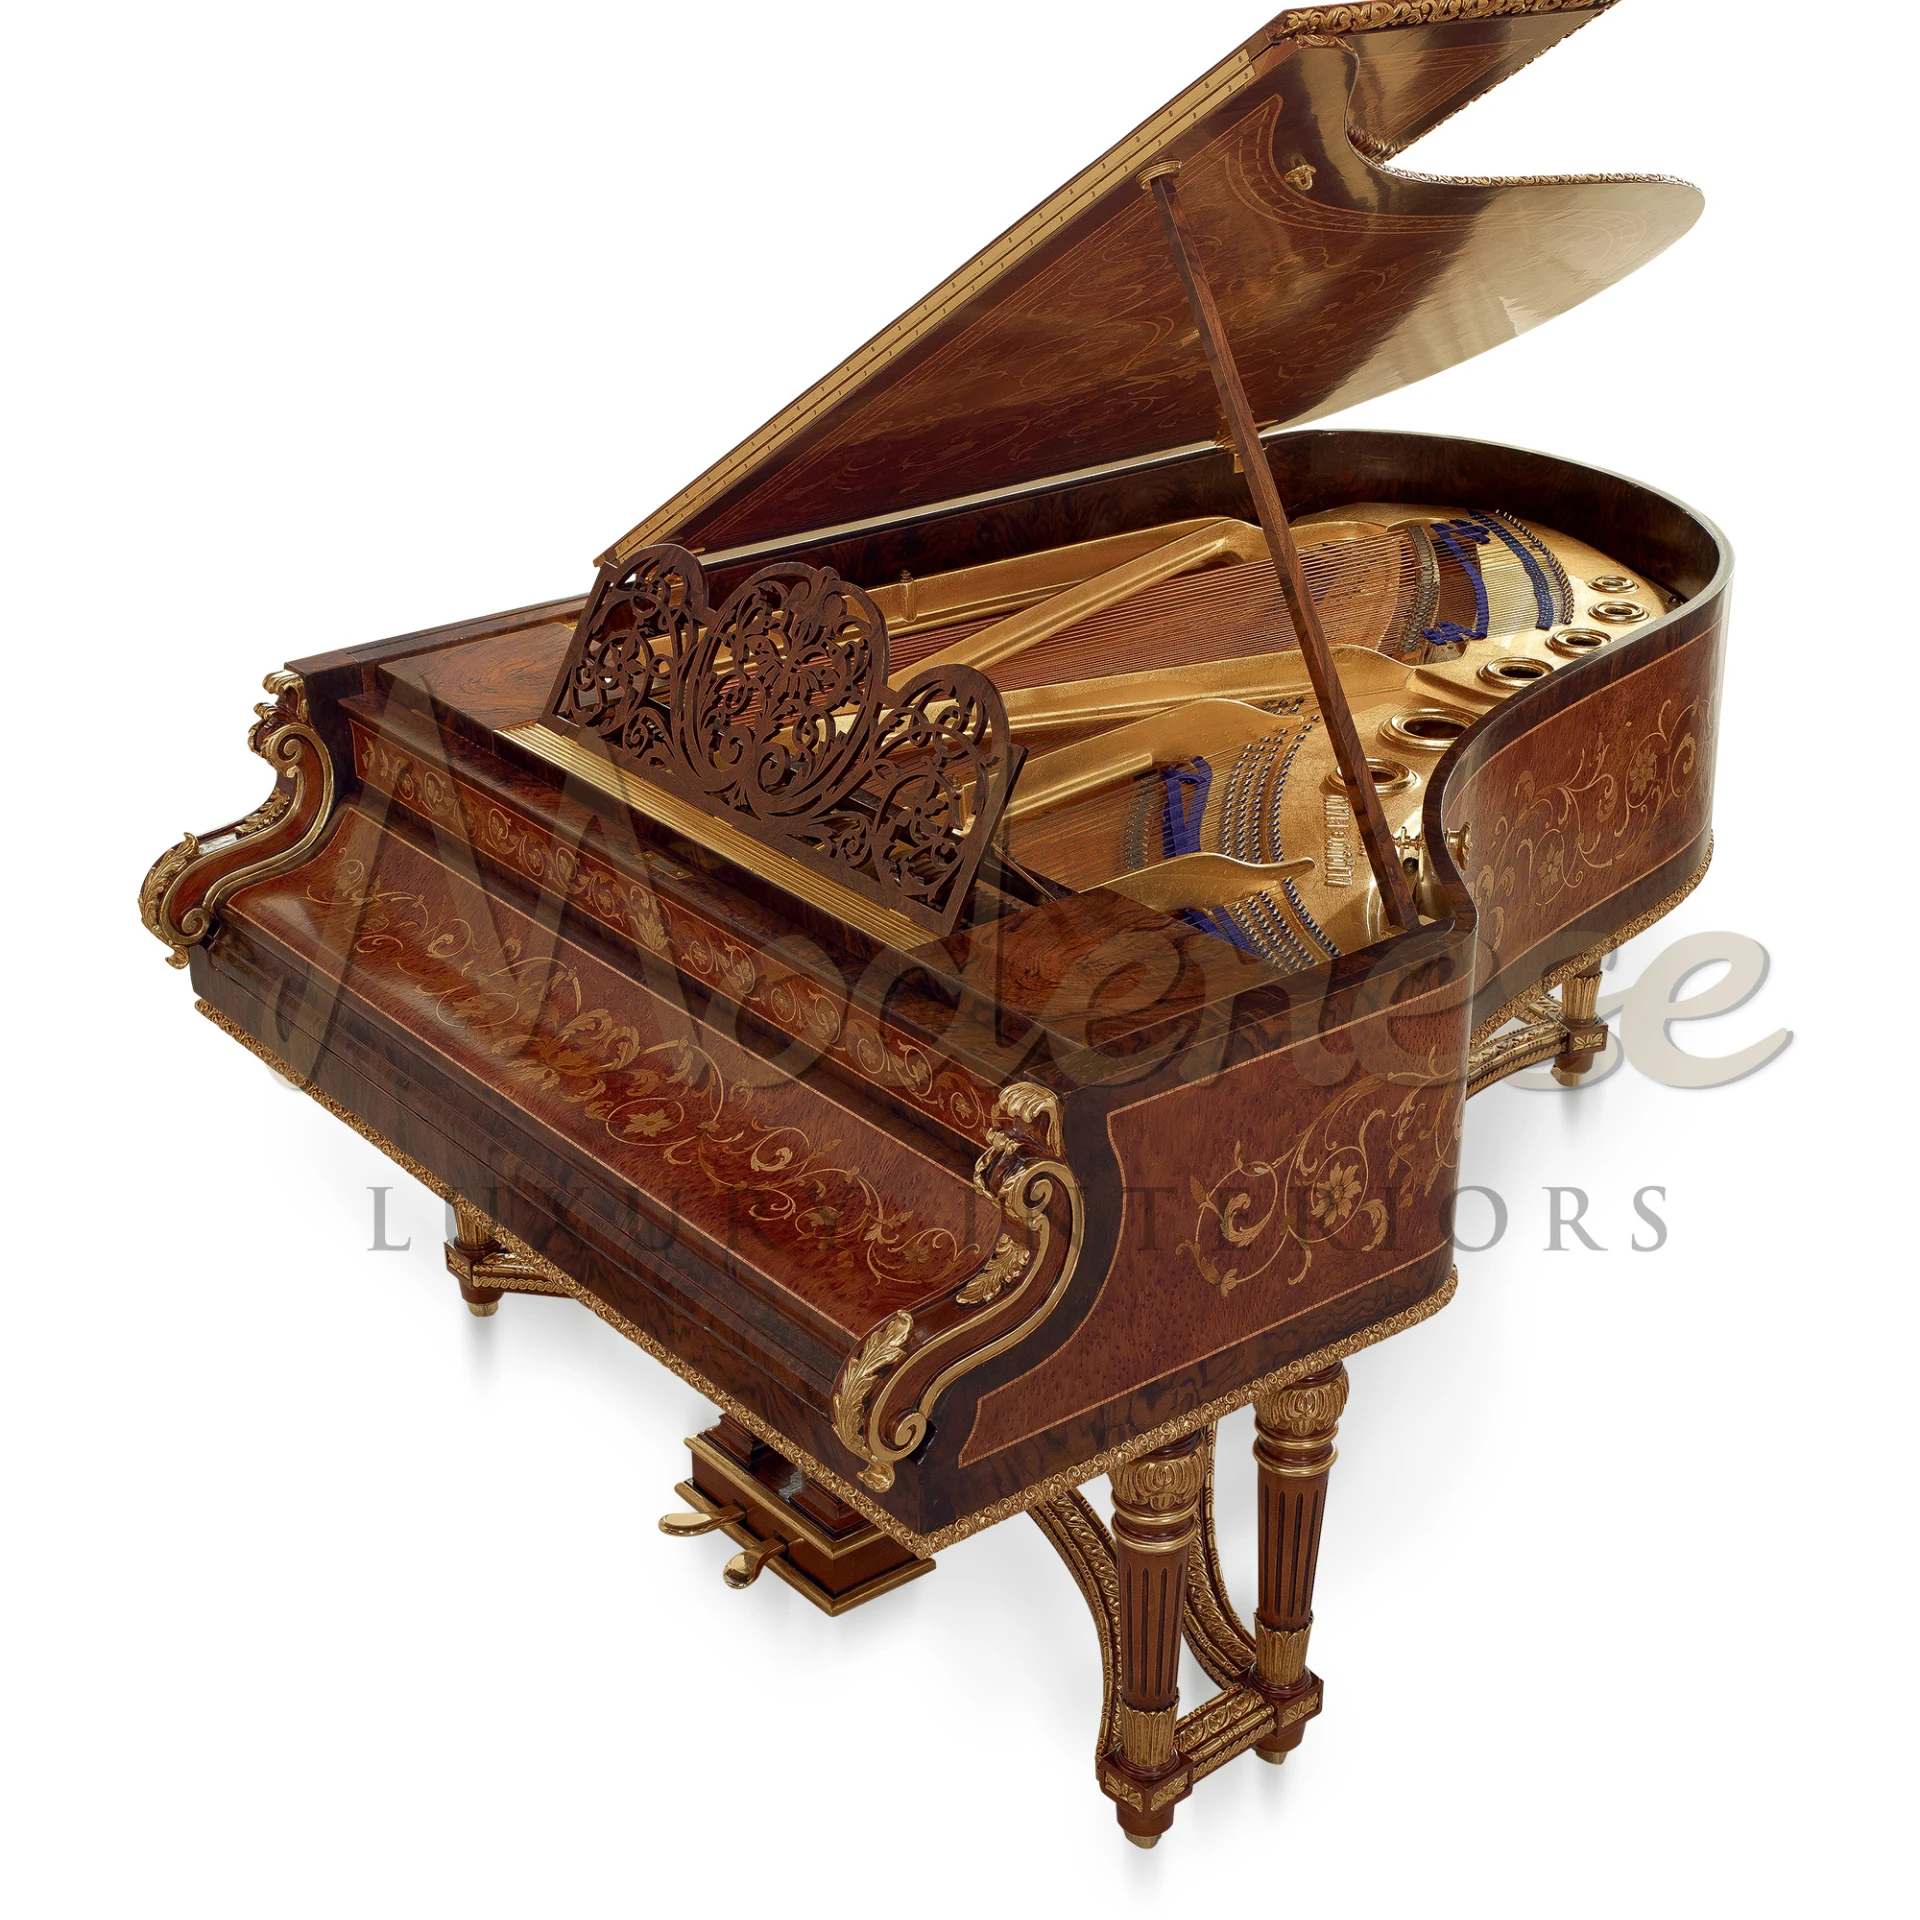 Classic Royal Piano with gold-plated hardware, embodying luxury villa design with exquisite ivory keys and hand-carved details.